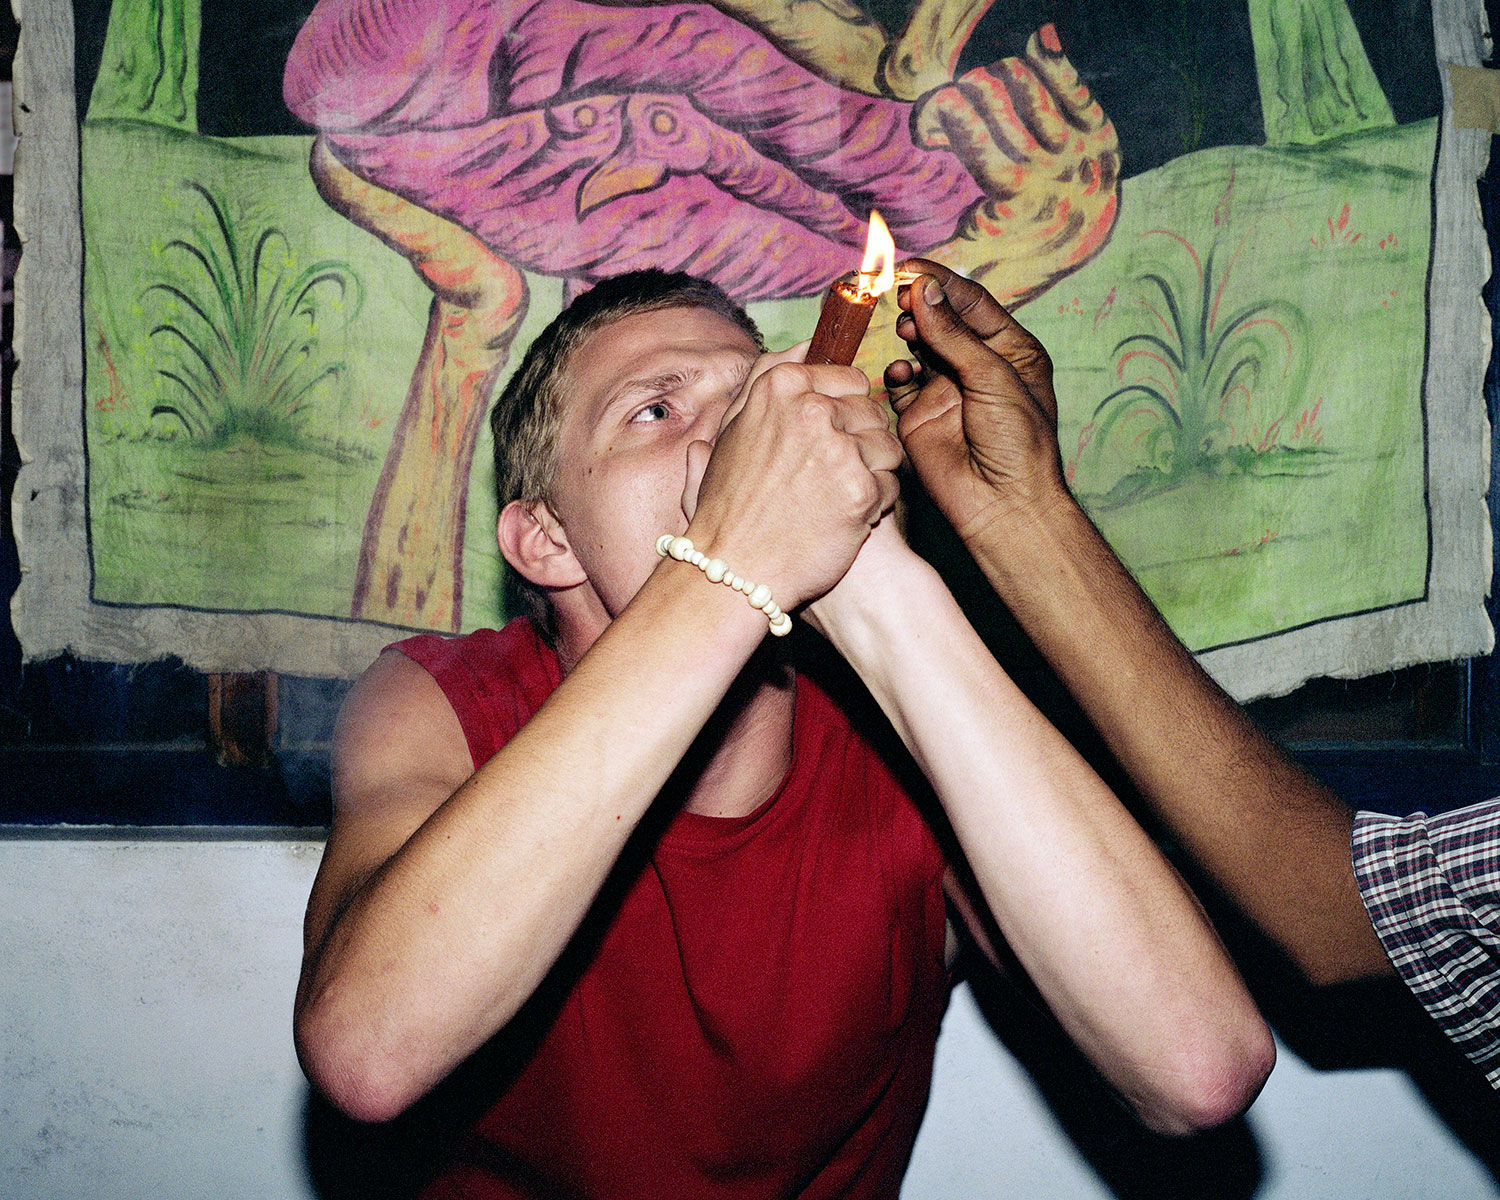 A tourist smokes a chillum pipe filled with charas, a form of hashish in Old Manali, India, August 2007.